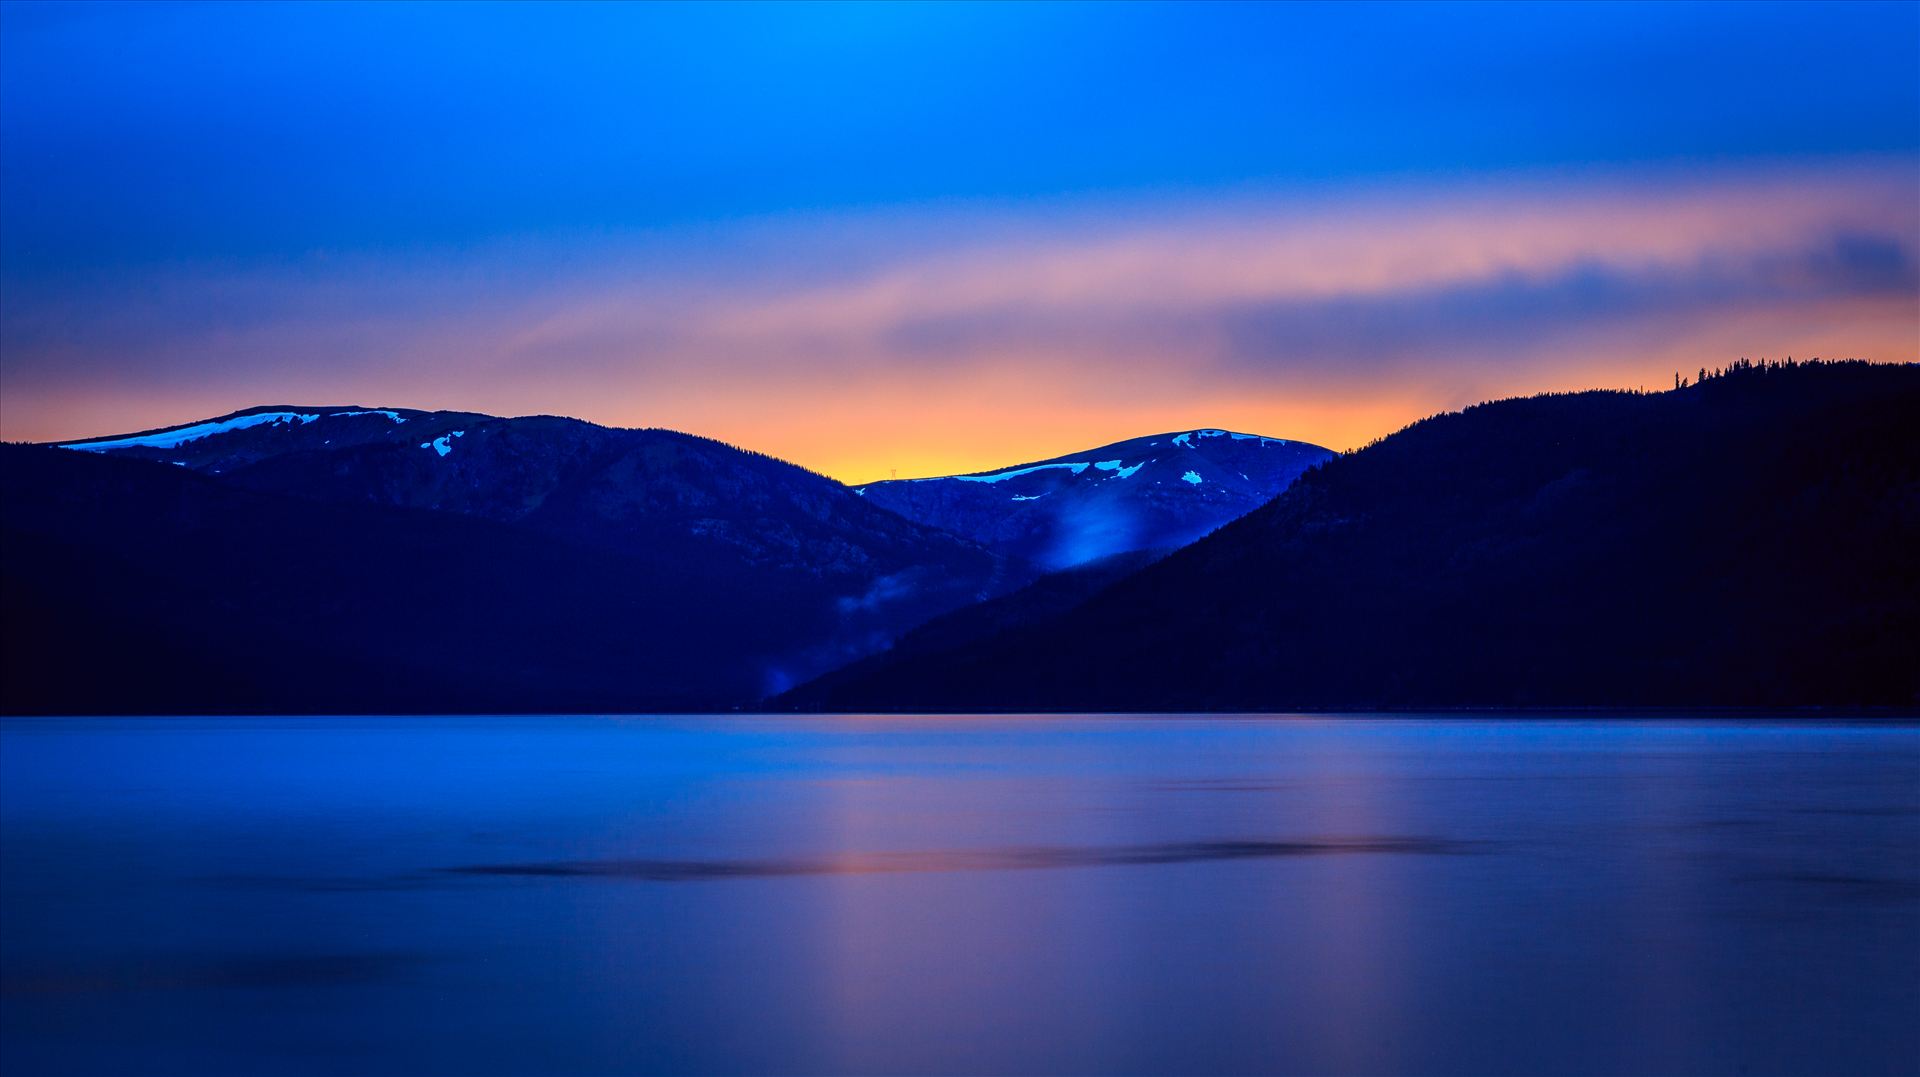 Sunset on Turquoise I Sunset on the calm protected waters of Turqouise Lake, Leadville Colorado. by Scott Smith Photos